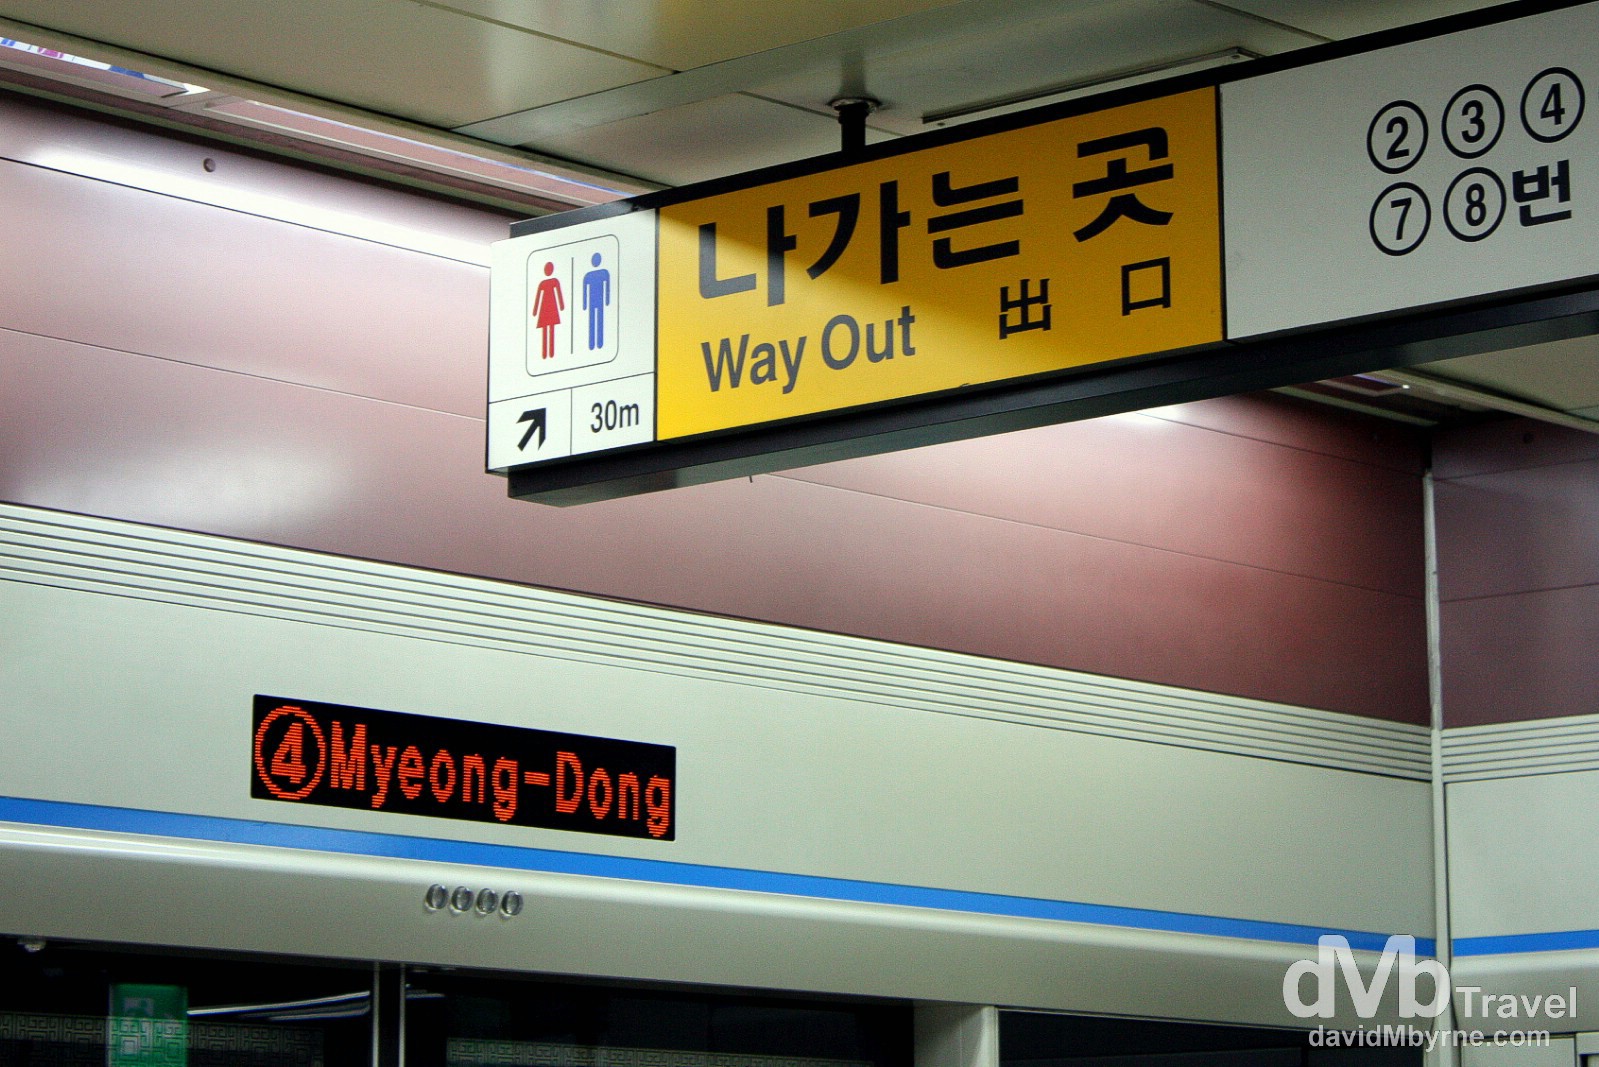 On the platform of Myeong-Dong metro station, Seoul, South Korea. July 8, 2008